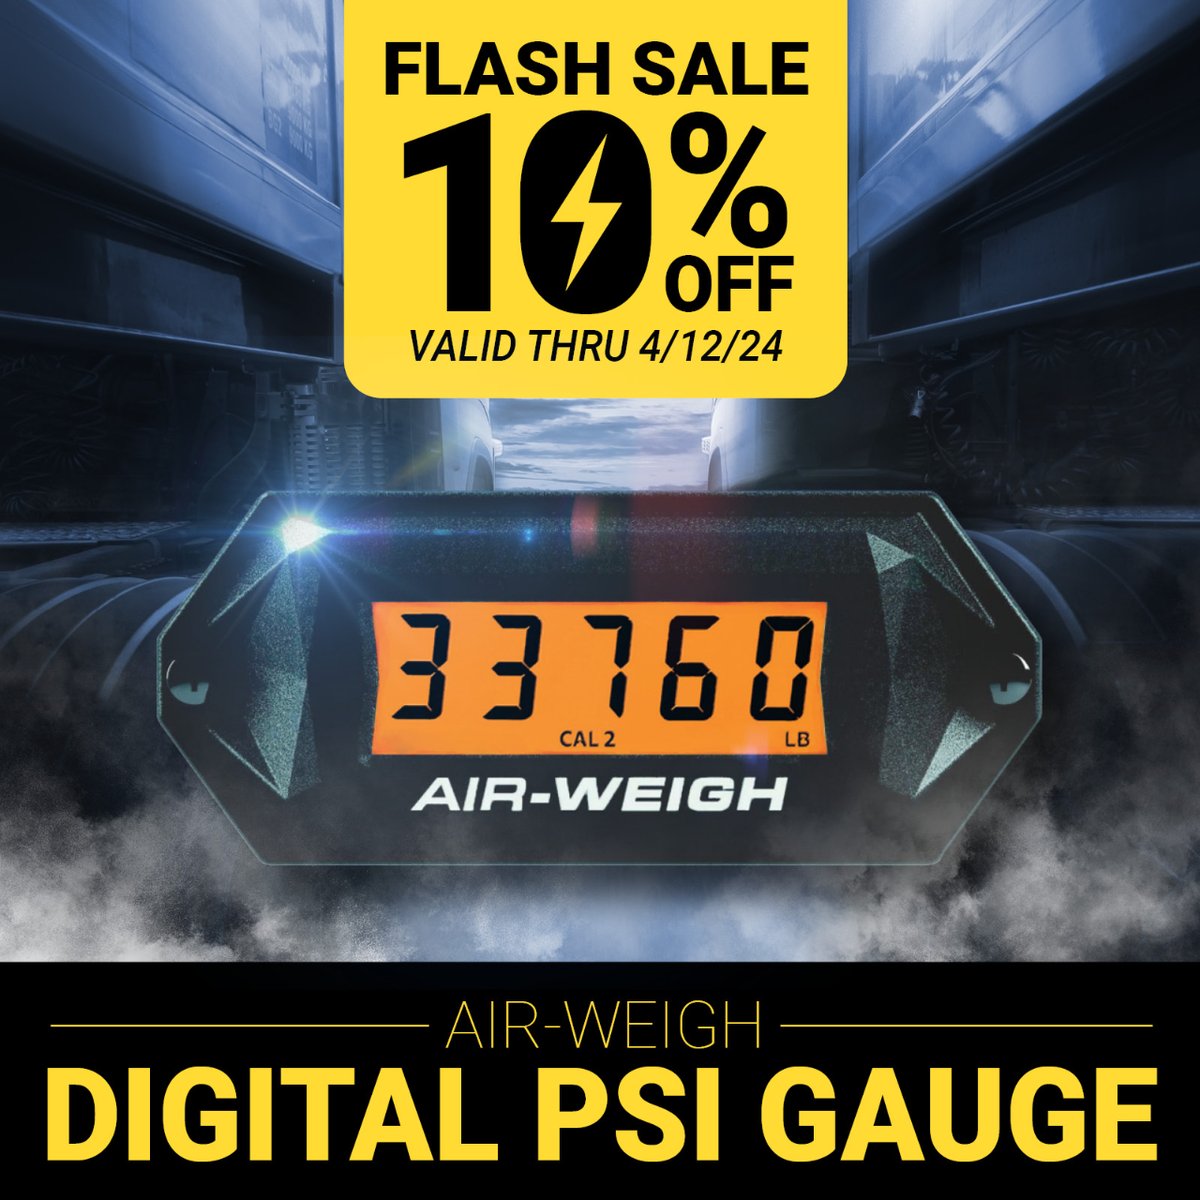 As if being portable and cost-effective wasn't enough, the Digital PSI Gauge is also 10% OFF during our⚡Flash Sale⚡! 4statetrucks.com/quick-weigh-di… Ends 4/12 11:59 p.m. cst.  #4StateTrucks #ChromeShopMafia #chromeshop #trucking #bigrig #truckers #diesel #airweigh